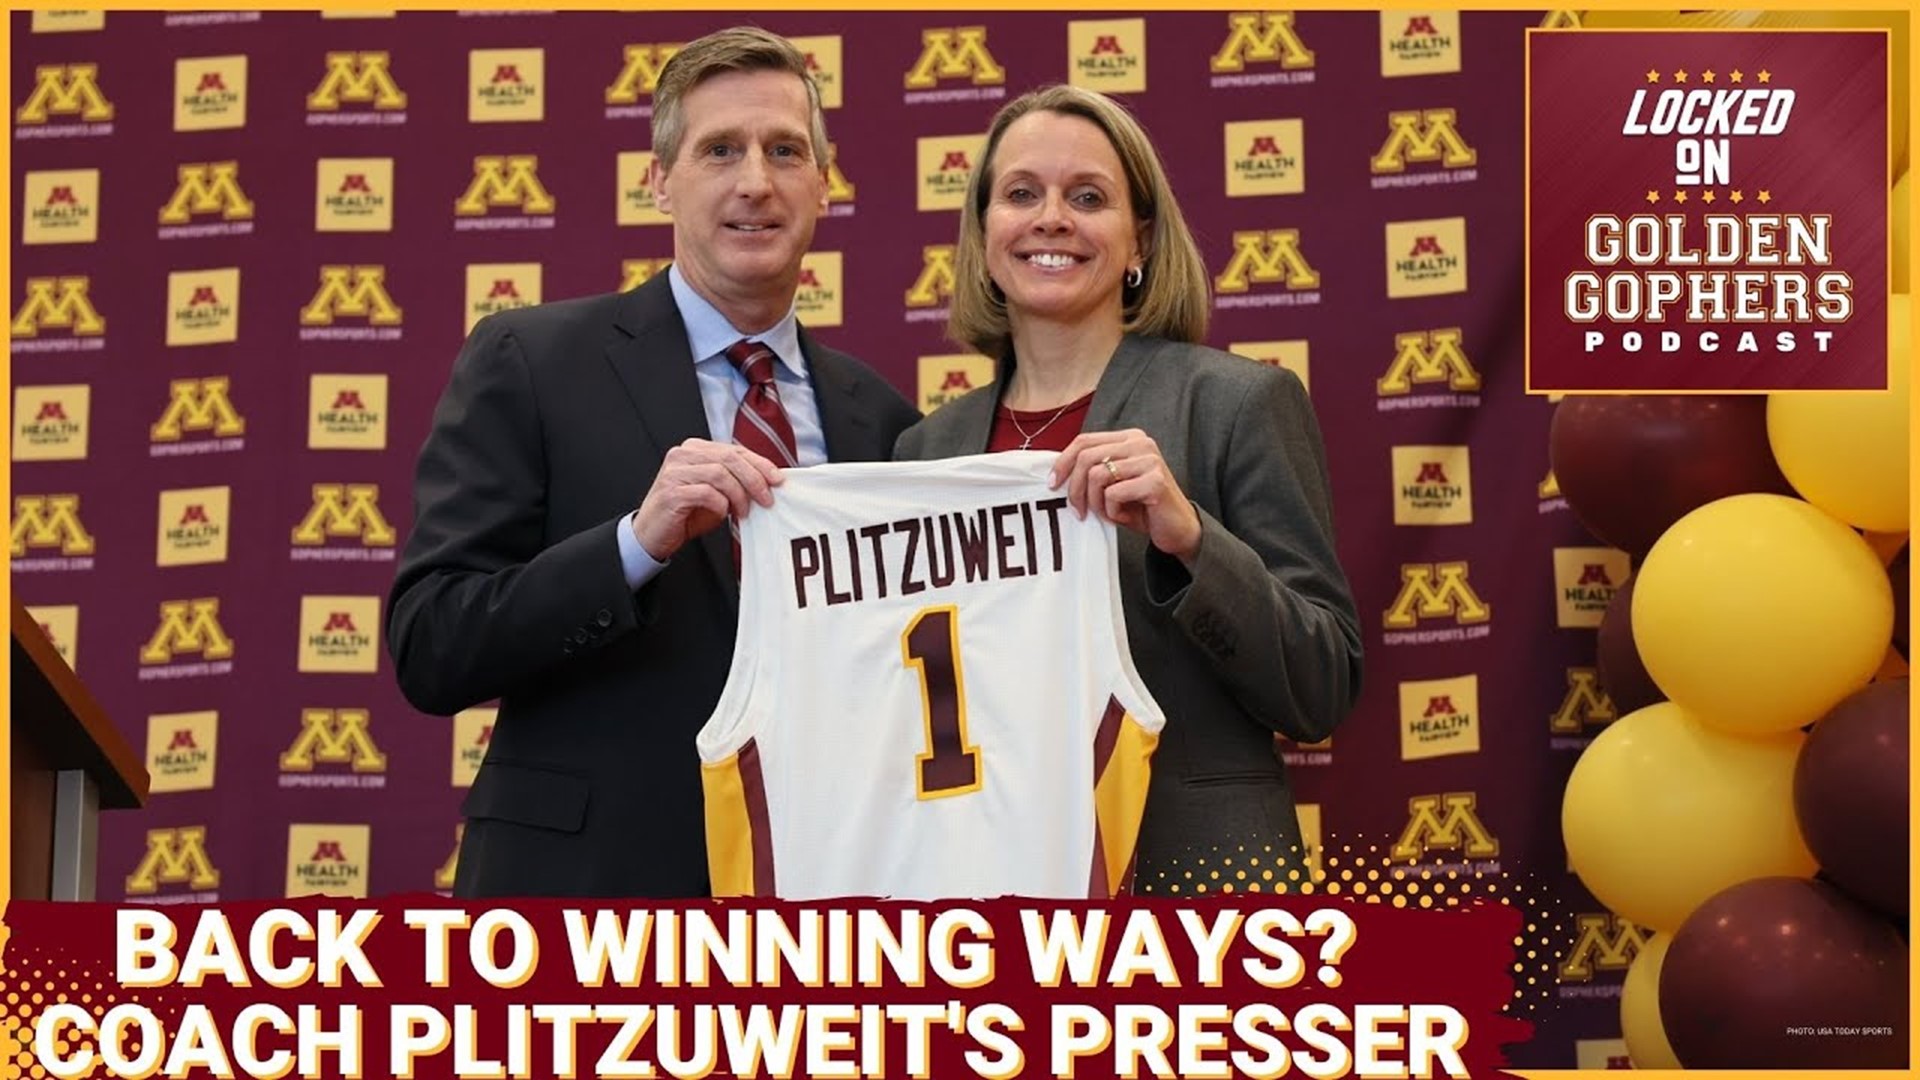 Today we discuss the new head coach of the Minnesota Women's Basketball team. We talk about her past and what she is looking to bring to Minnesota.